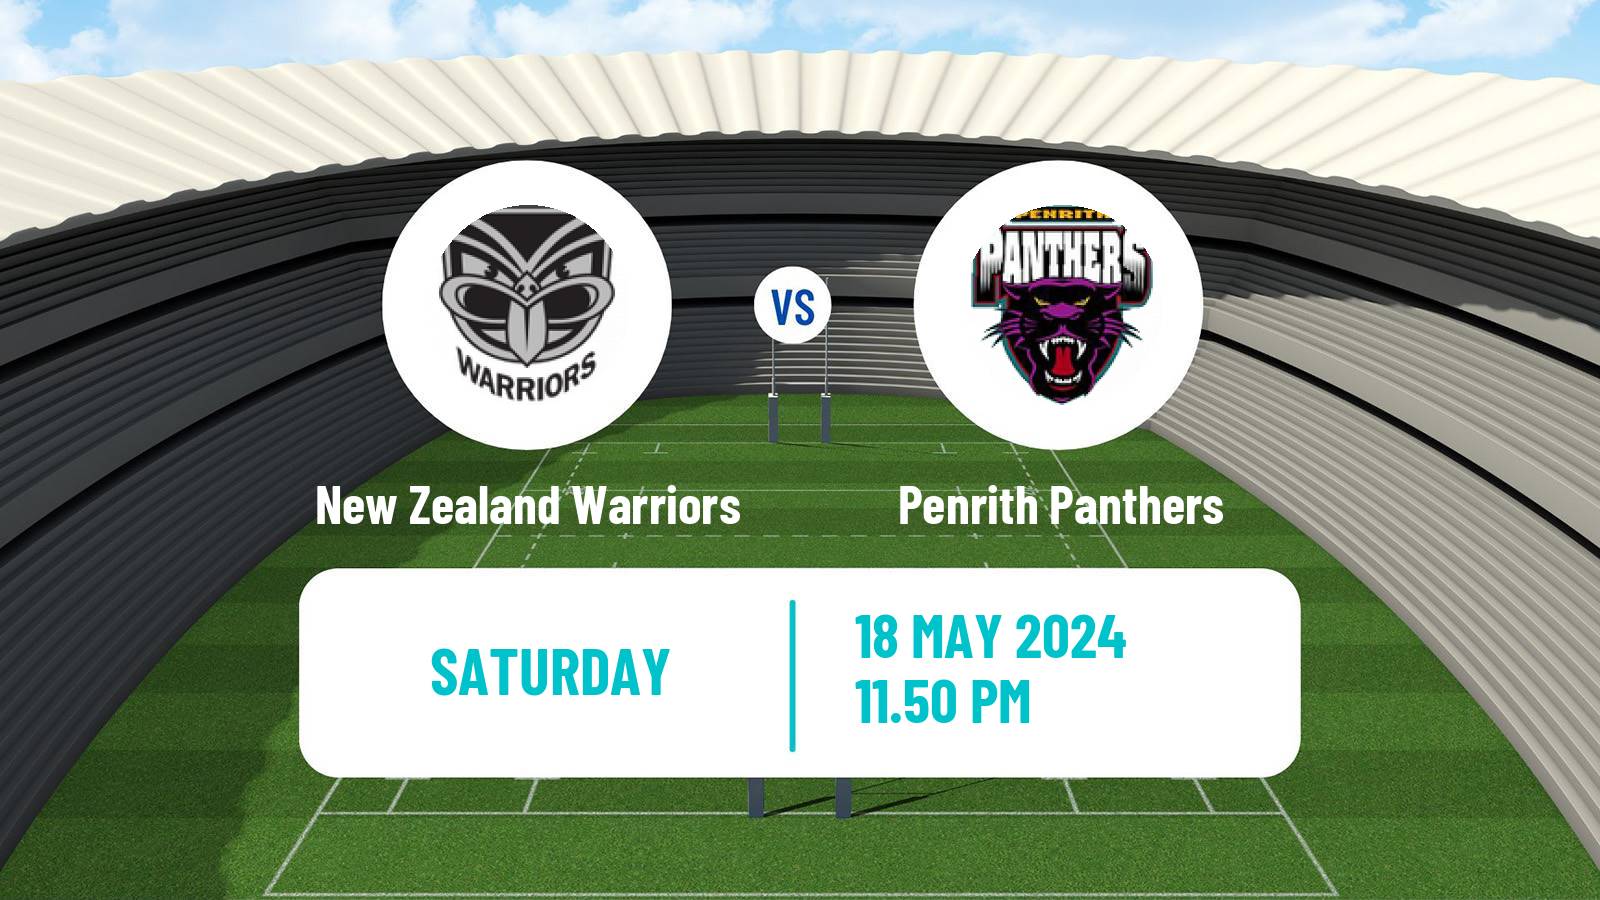 Rugby league Australian NRL New Zealand Warriors - Penrith Panthers